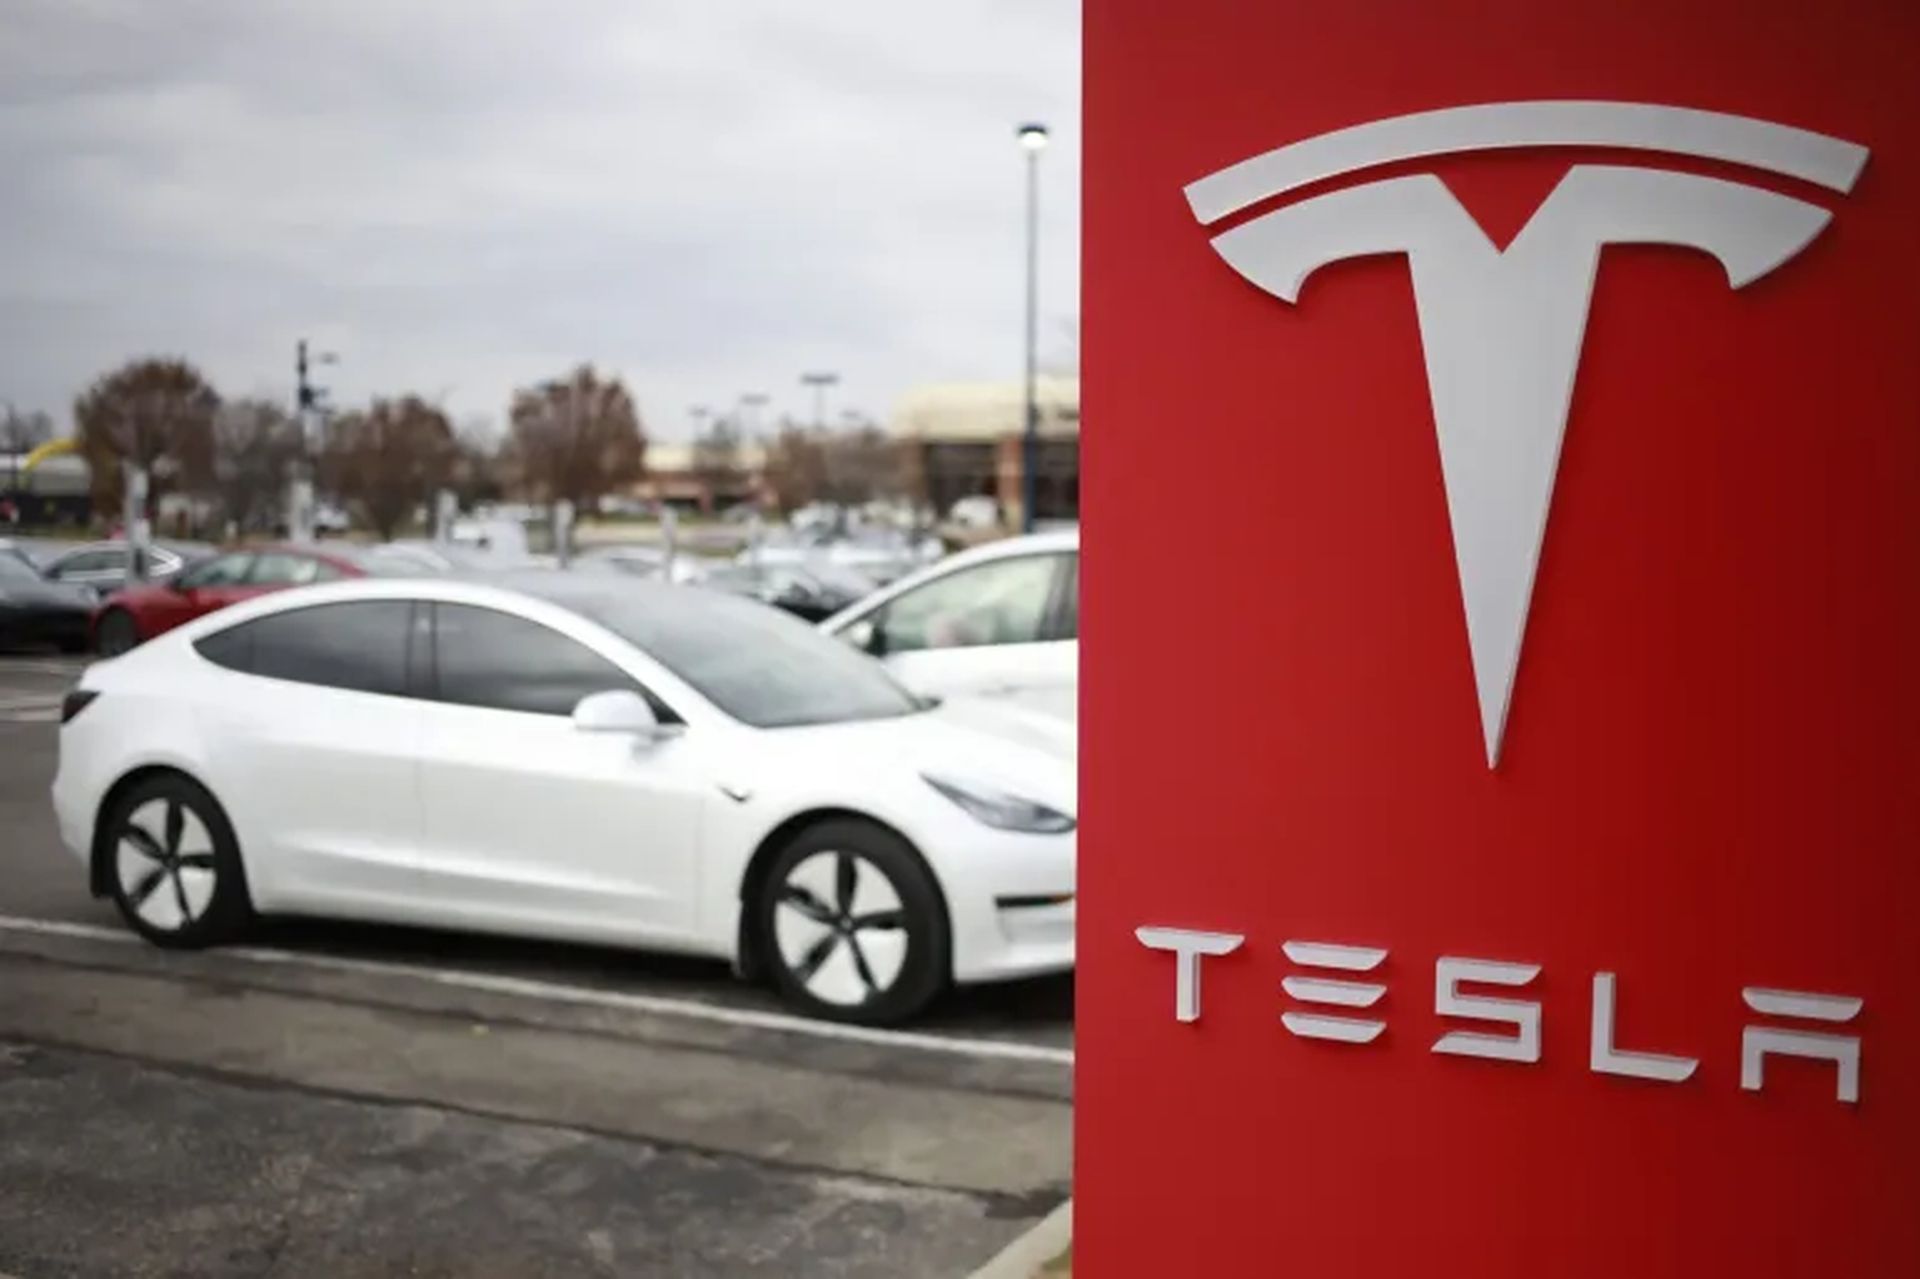 Tesla recalls vehicles, almost 1.1 million vehicles affected in the United States, and it is because the windows may close too quickly and pinch people's...